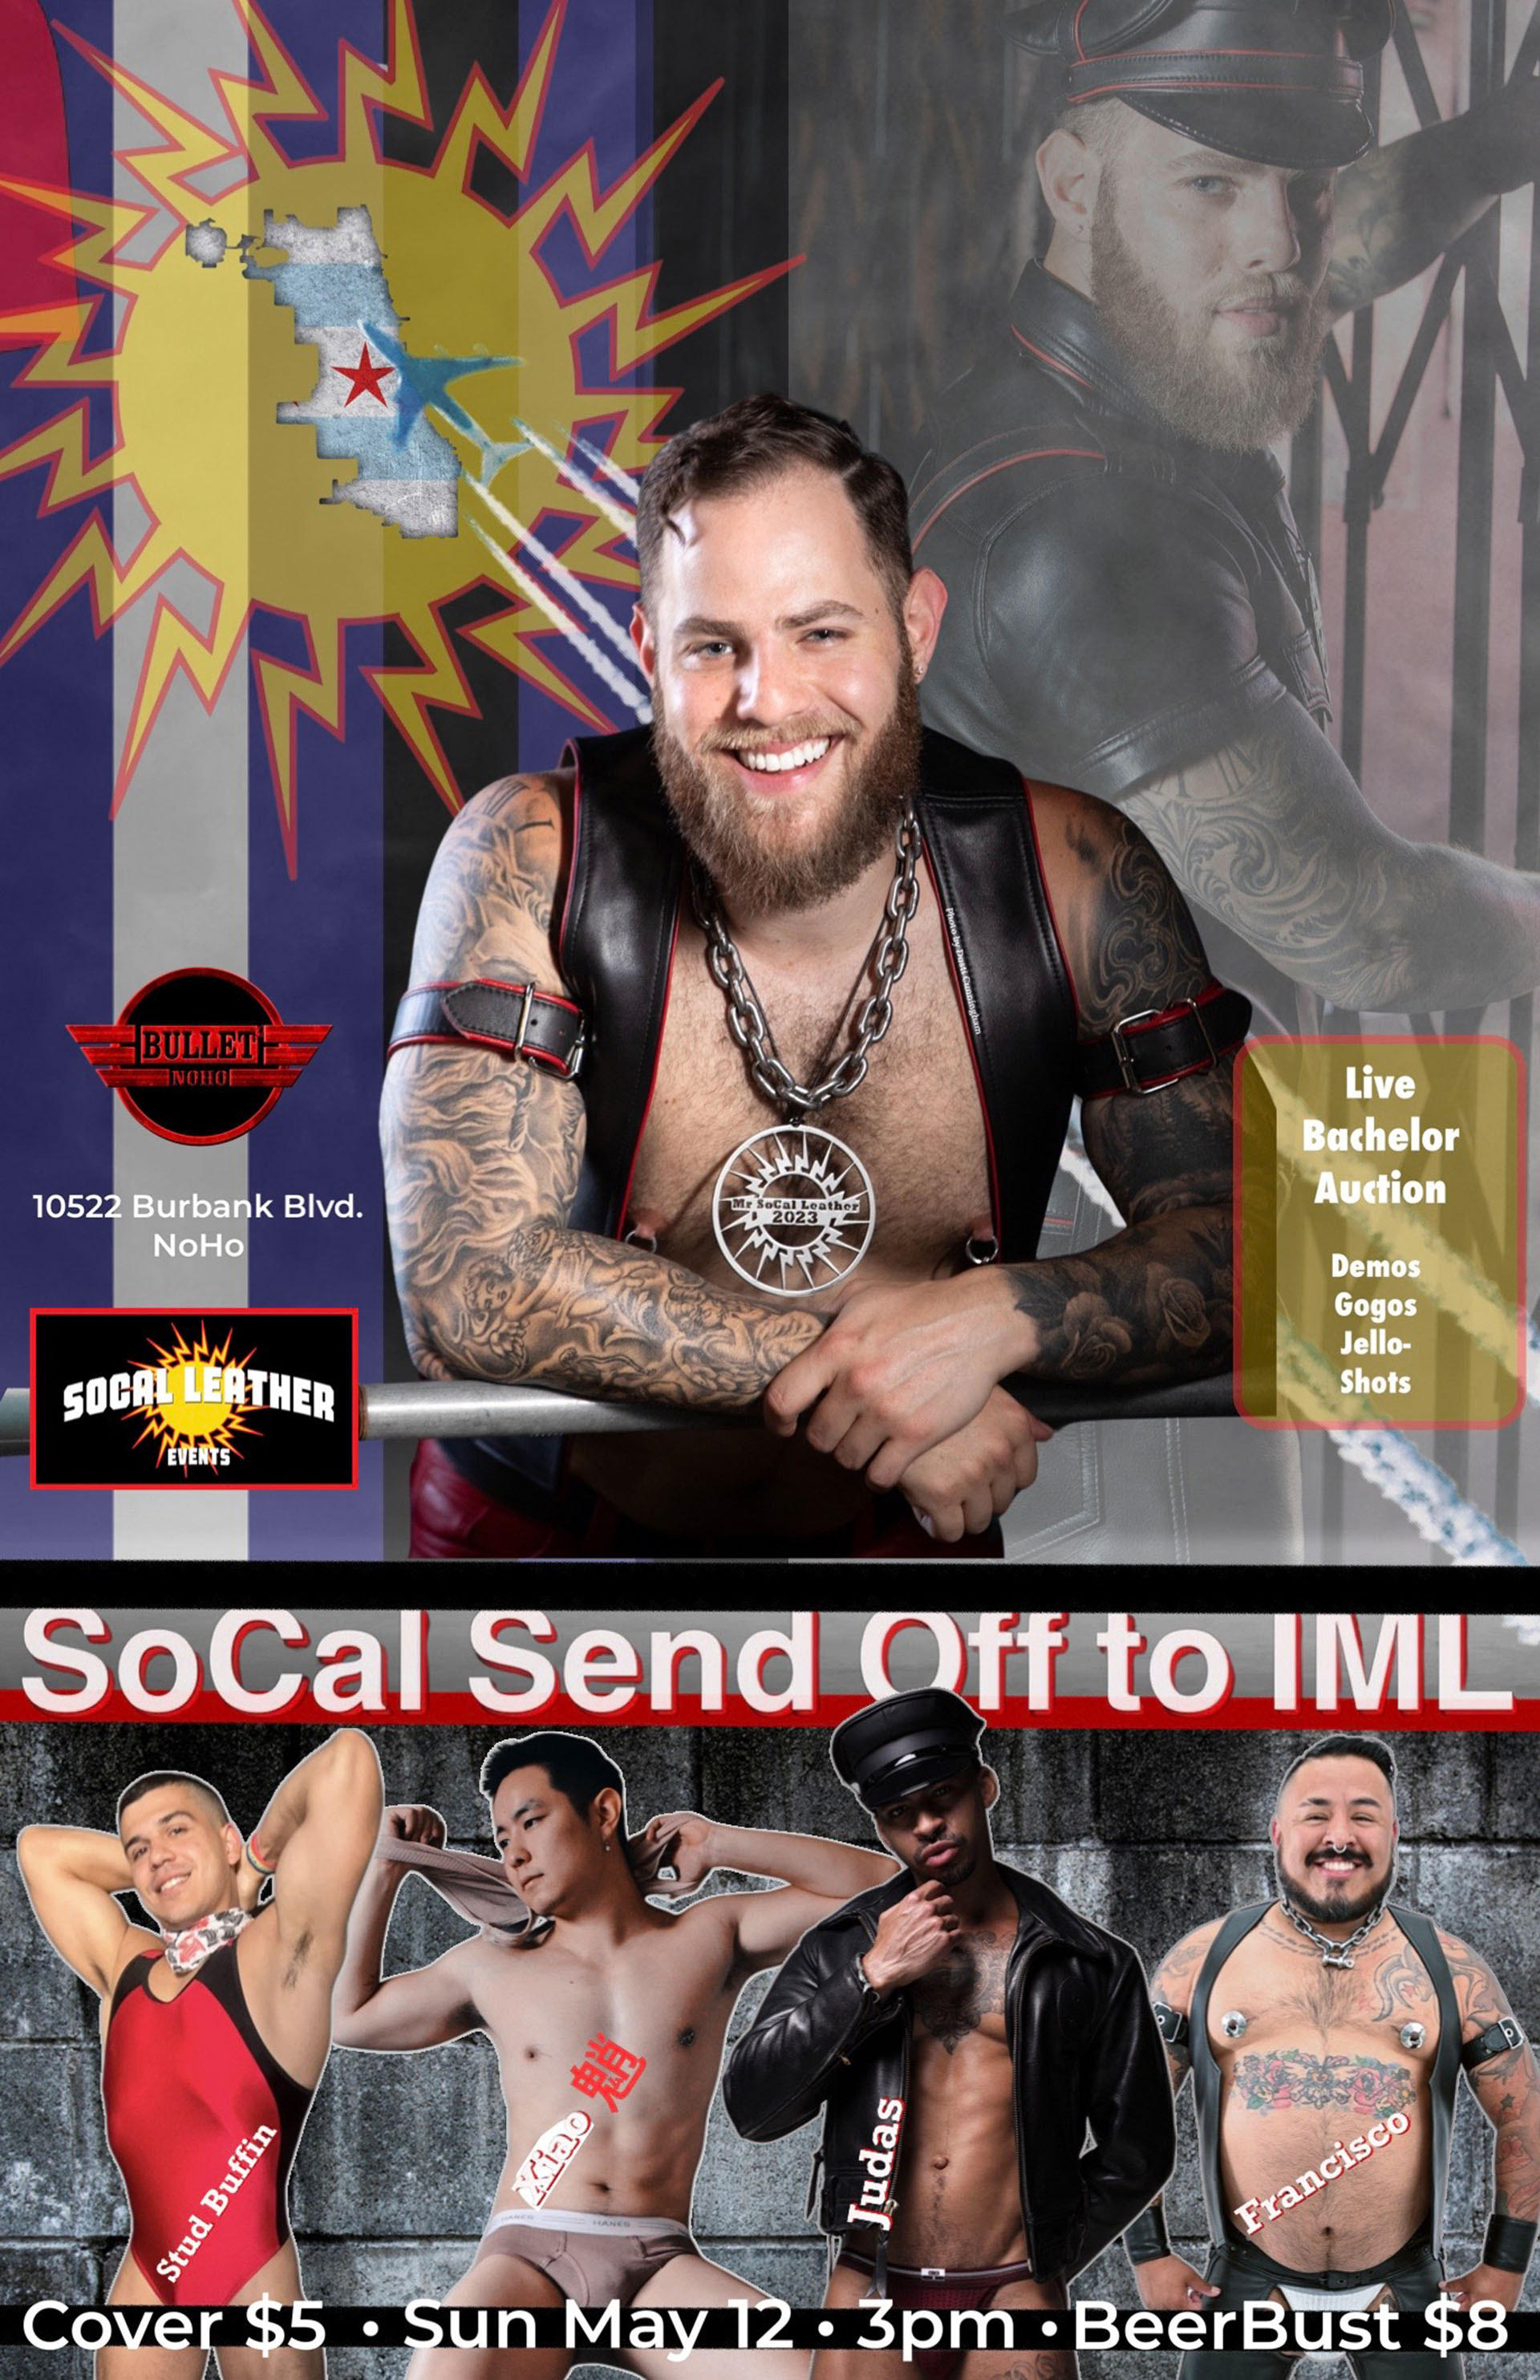 The Bullet Bar and SoCal Leather Events Presents SoCal Send Off to IML: Sunday, 05/12/24 from 3:00 PM to 8:00 PM. Cover $5, or Beer Bust $8.